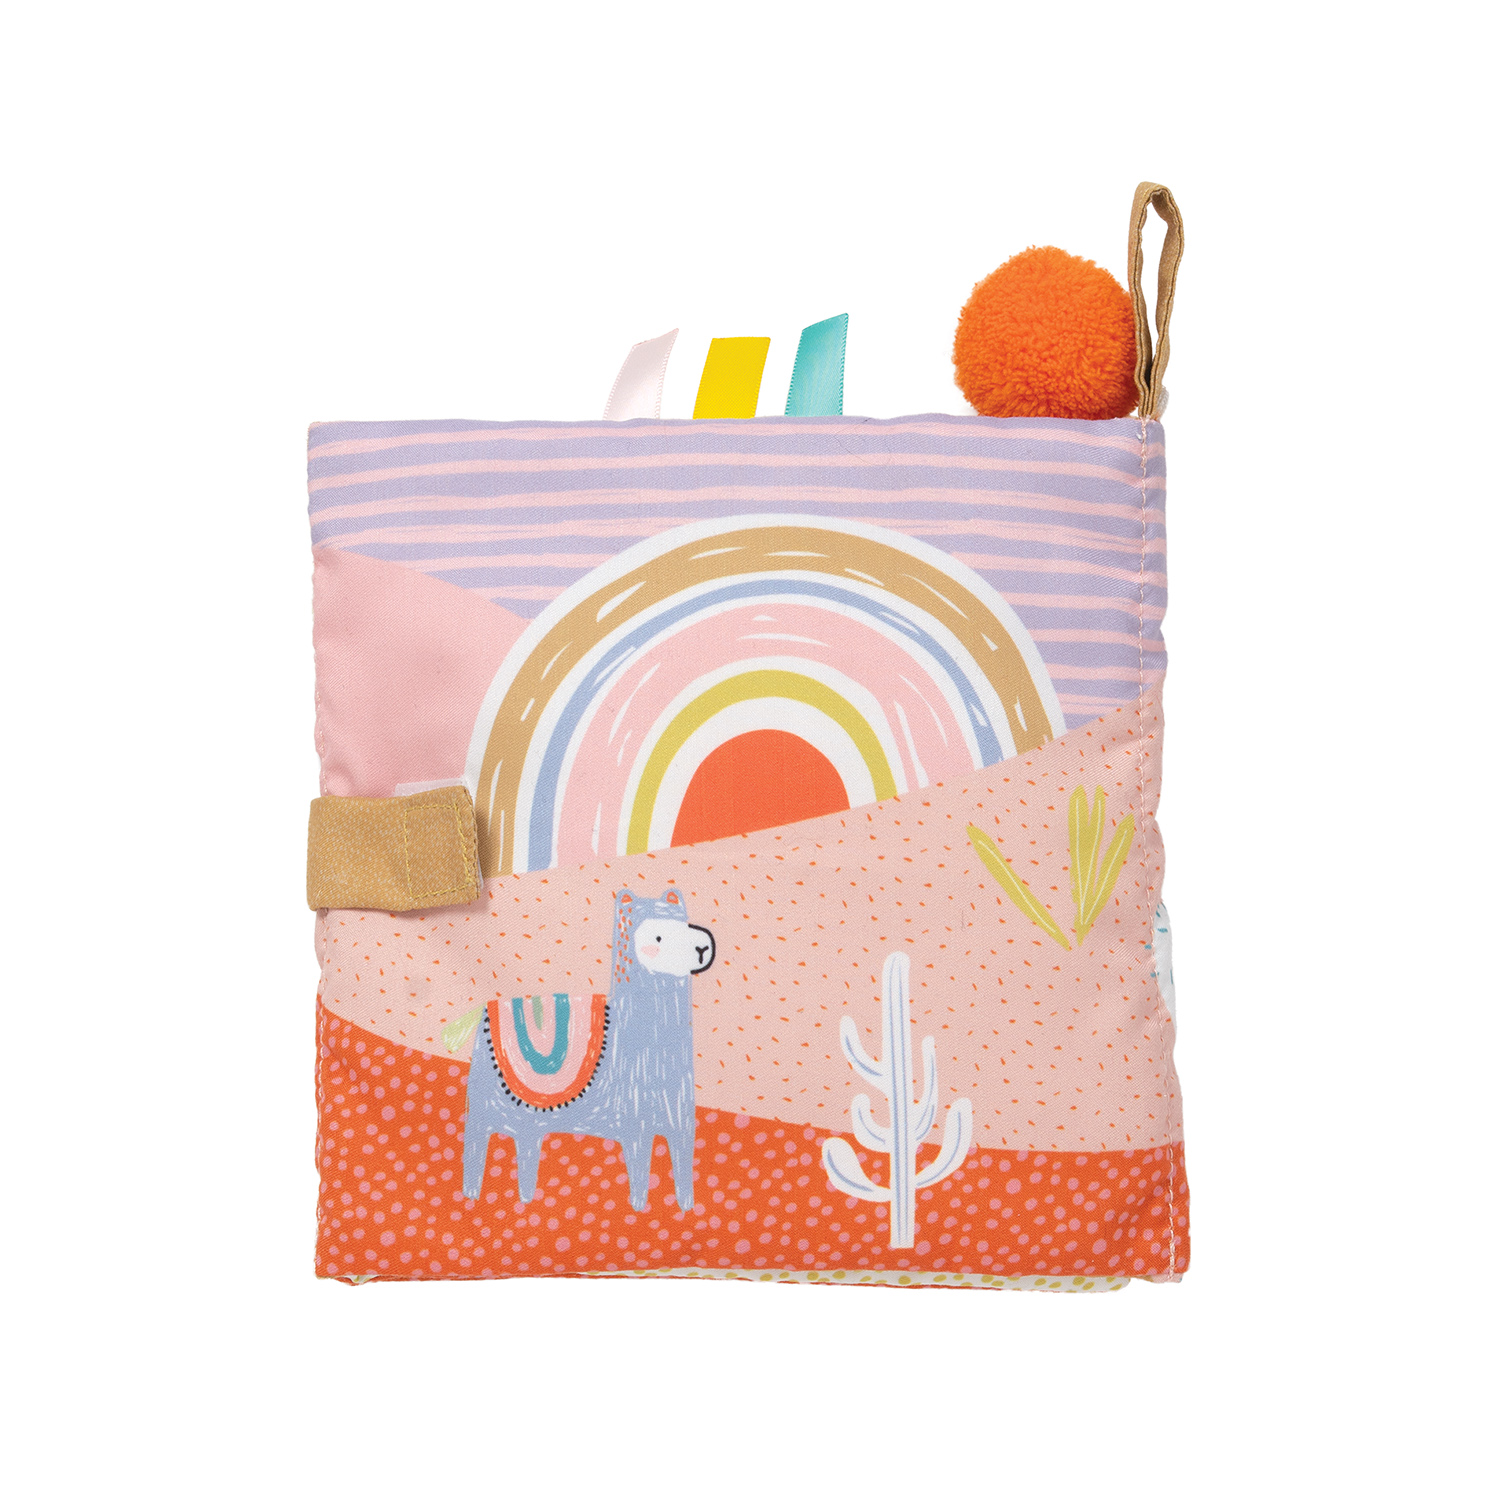 Manhattan Toy Llama Themed Soft Baby Activity Book with Squeaker, Crinkle Paper and Baby-safe Mirror - image 5 of 8